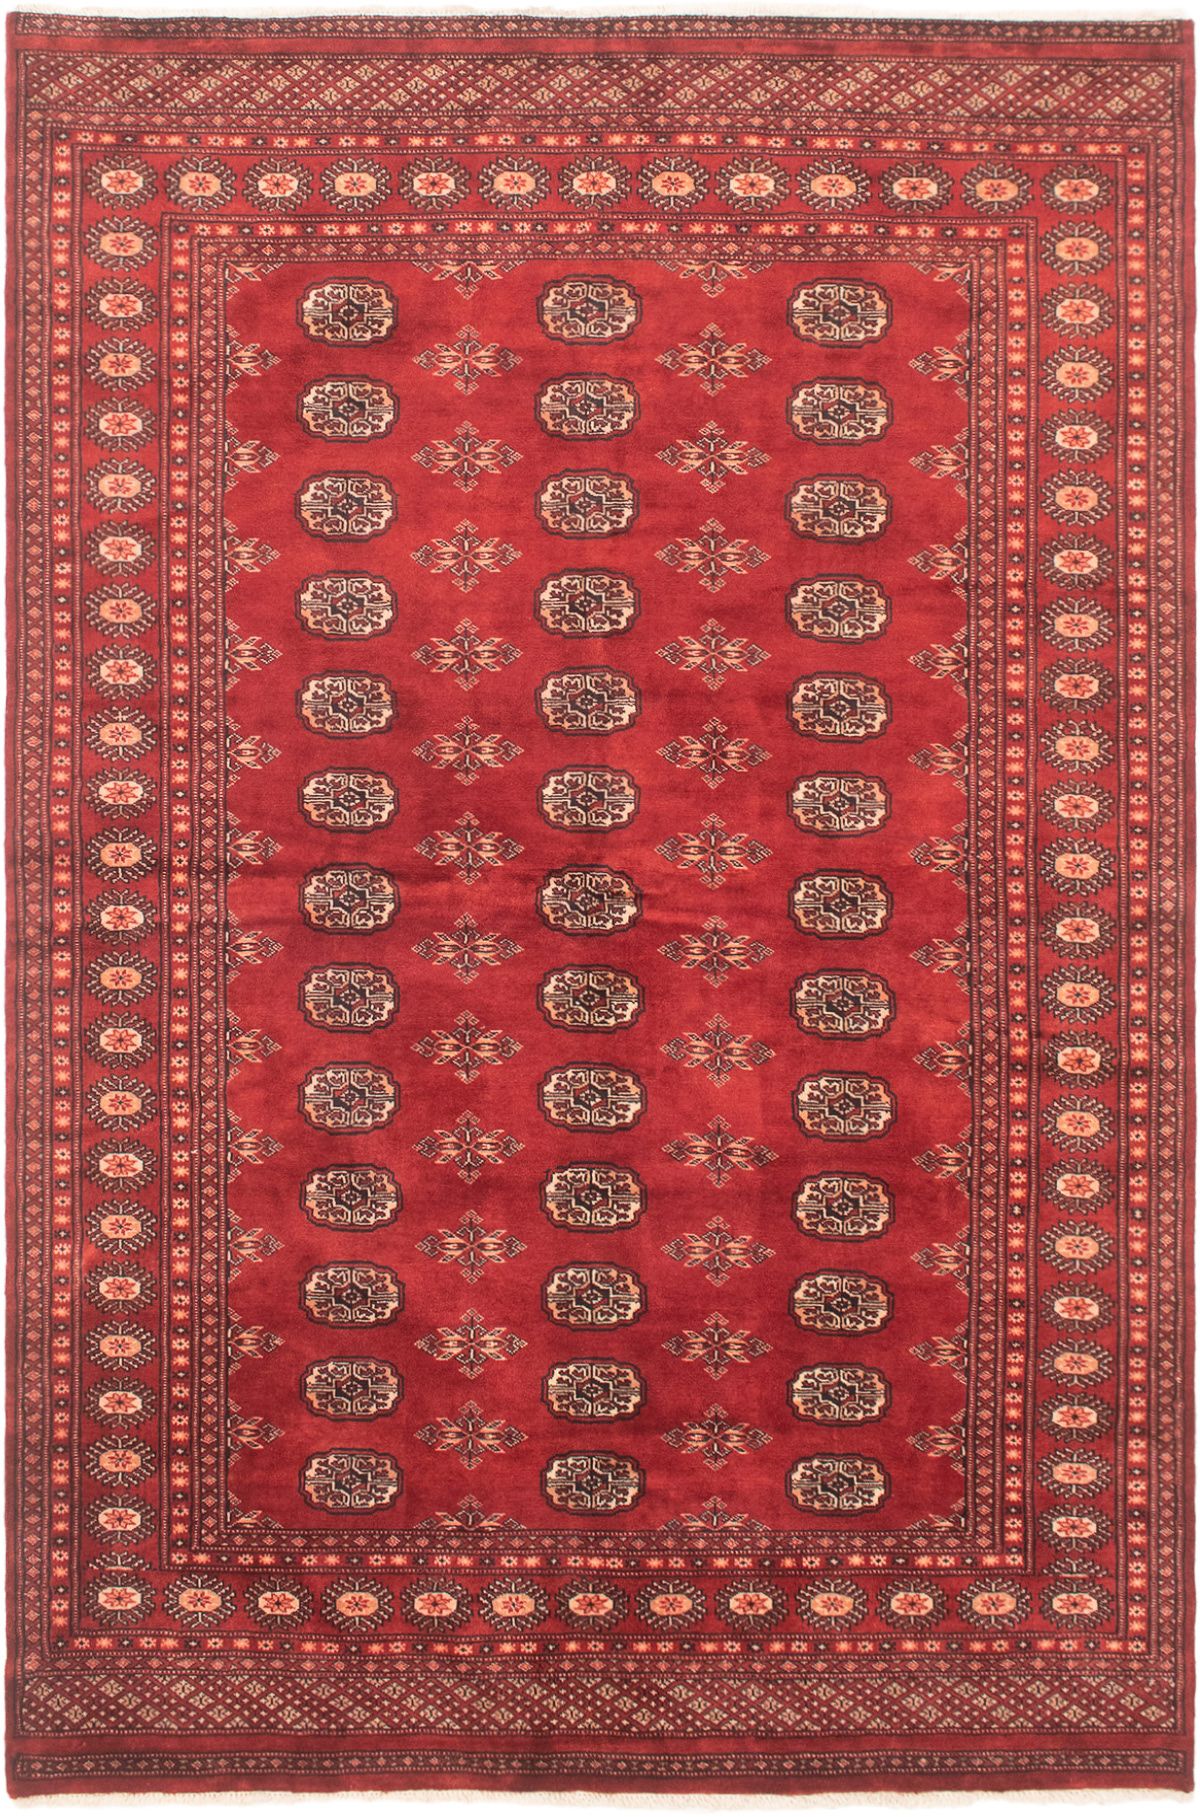 Hand-knotted Finest Peshawar Bokhara Red Wool Rug 5'6" x 8'4" Size: 5'6" x 8'4"  